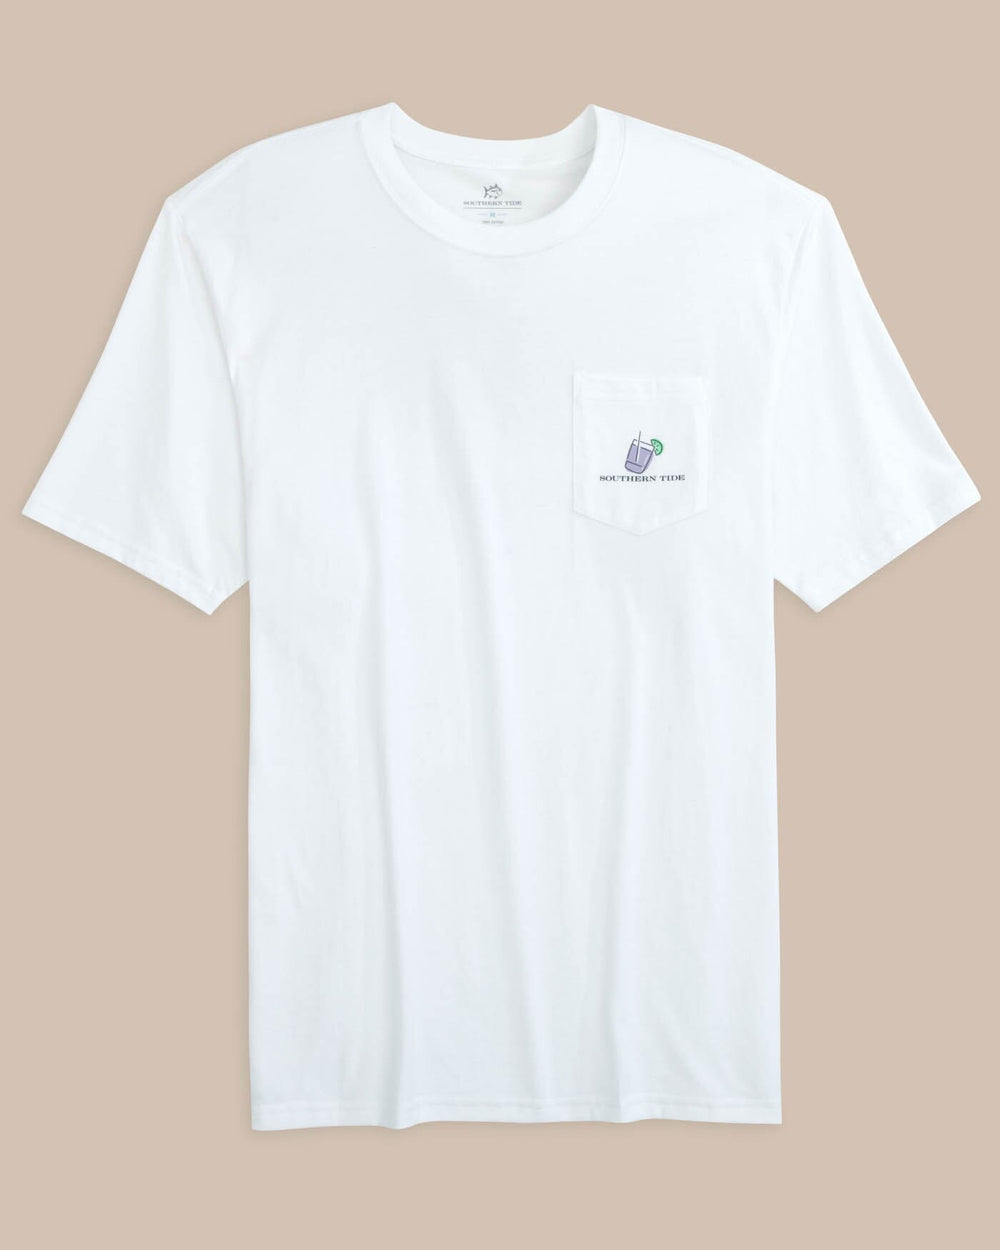 The front view of the Southern Tide Dazed and Transfused Short Sleeve T-Shirt by Southern Tide - Classic White